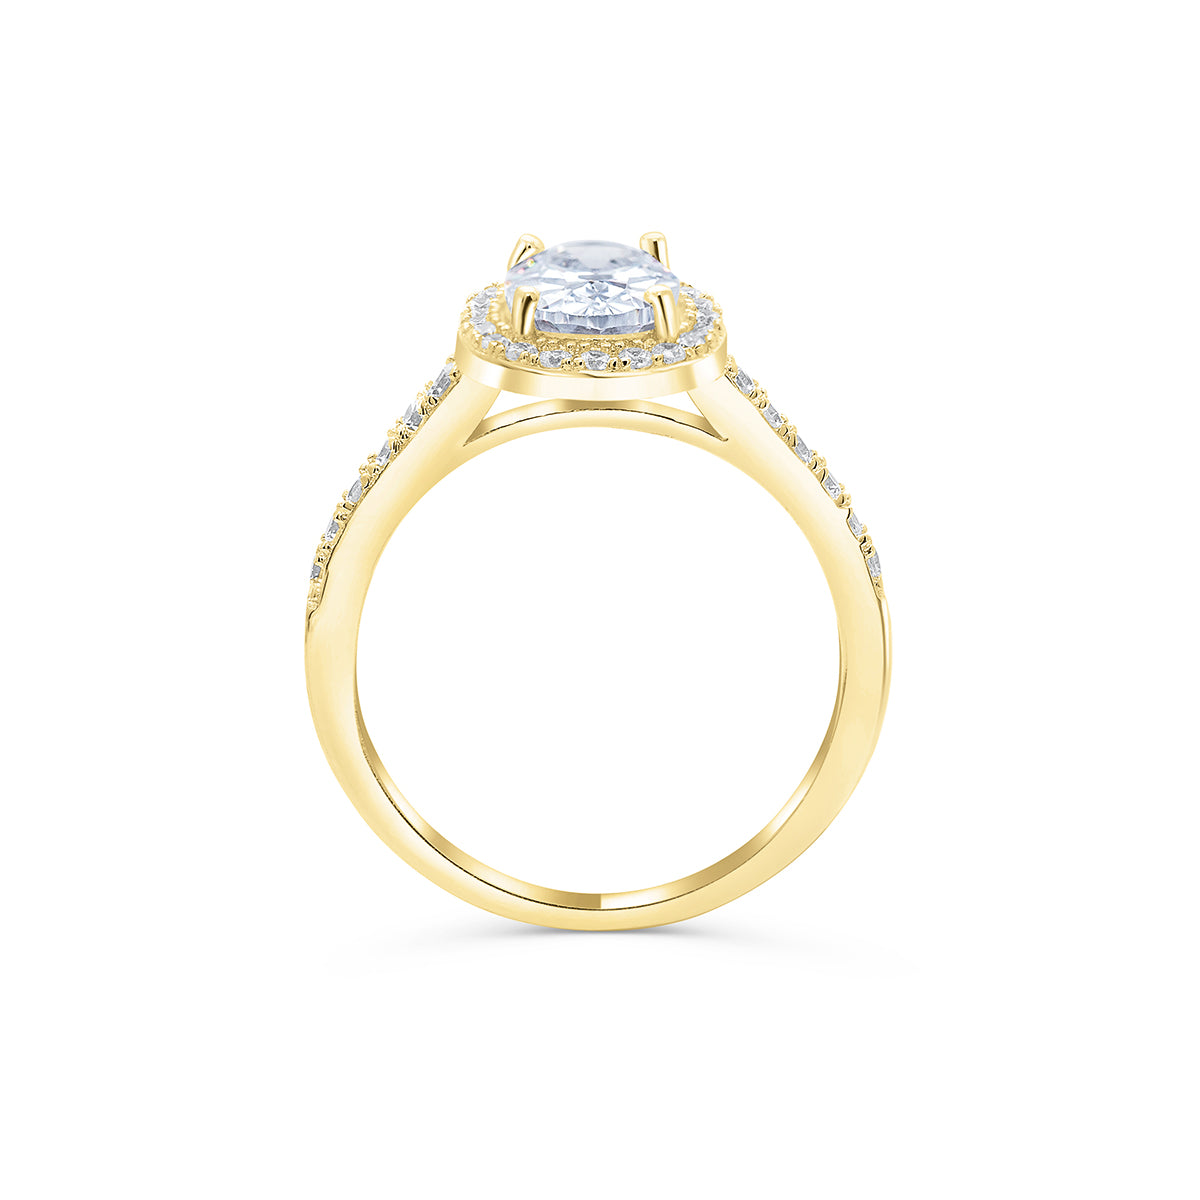 Yellow gold oval halo engagement ring